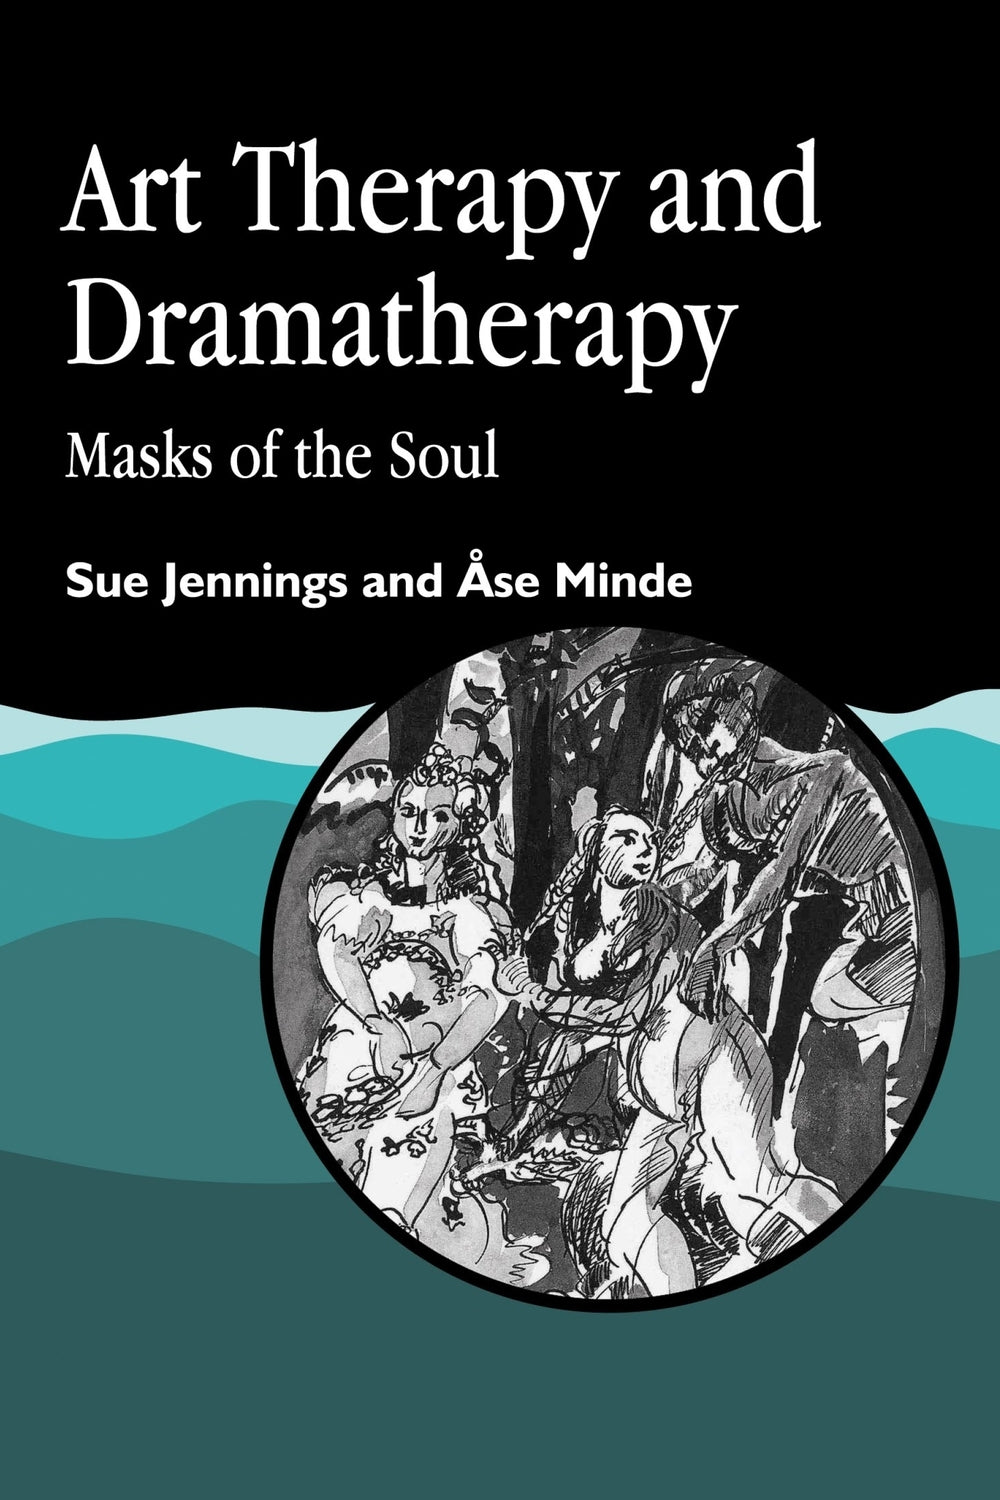 Art Therapy and Dramatherapy by Ase Minde, Sue Jennings